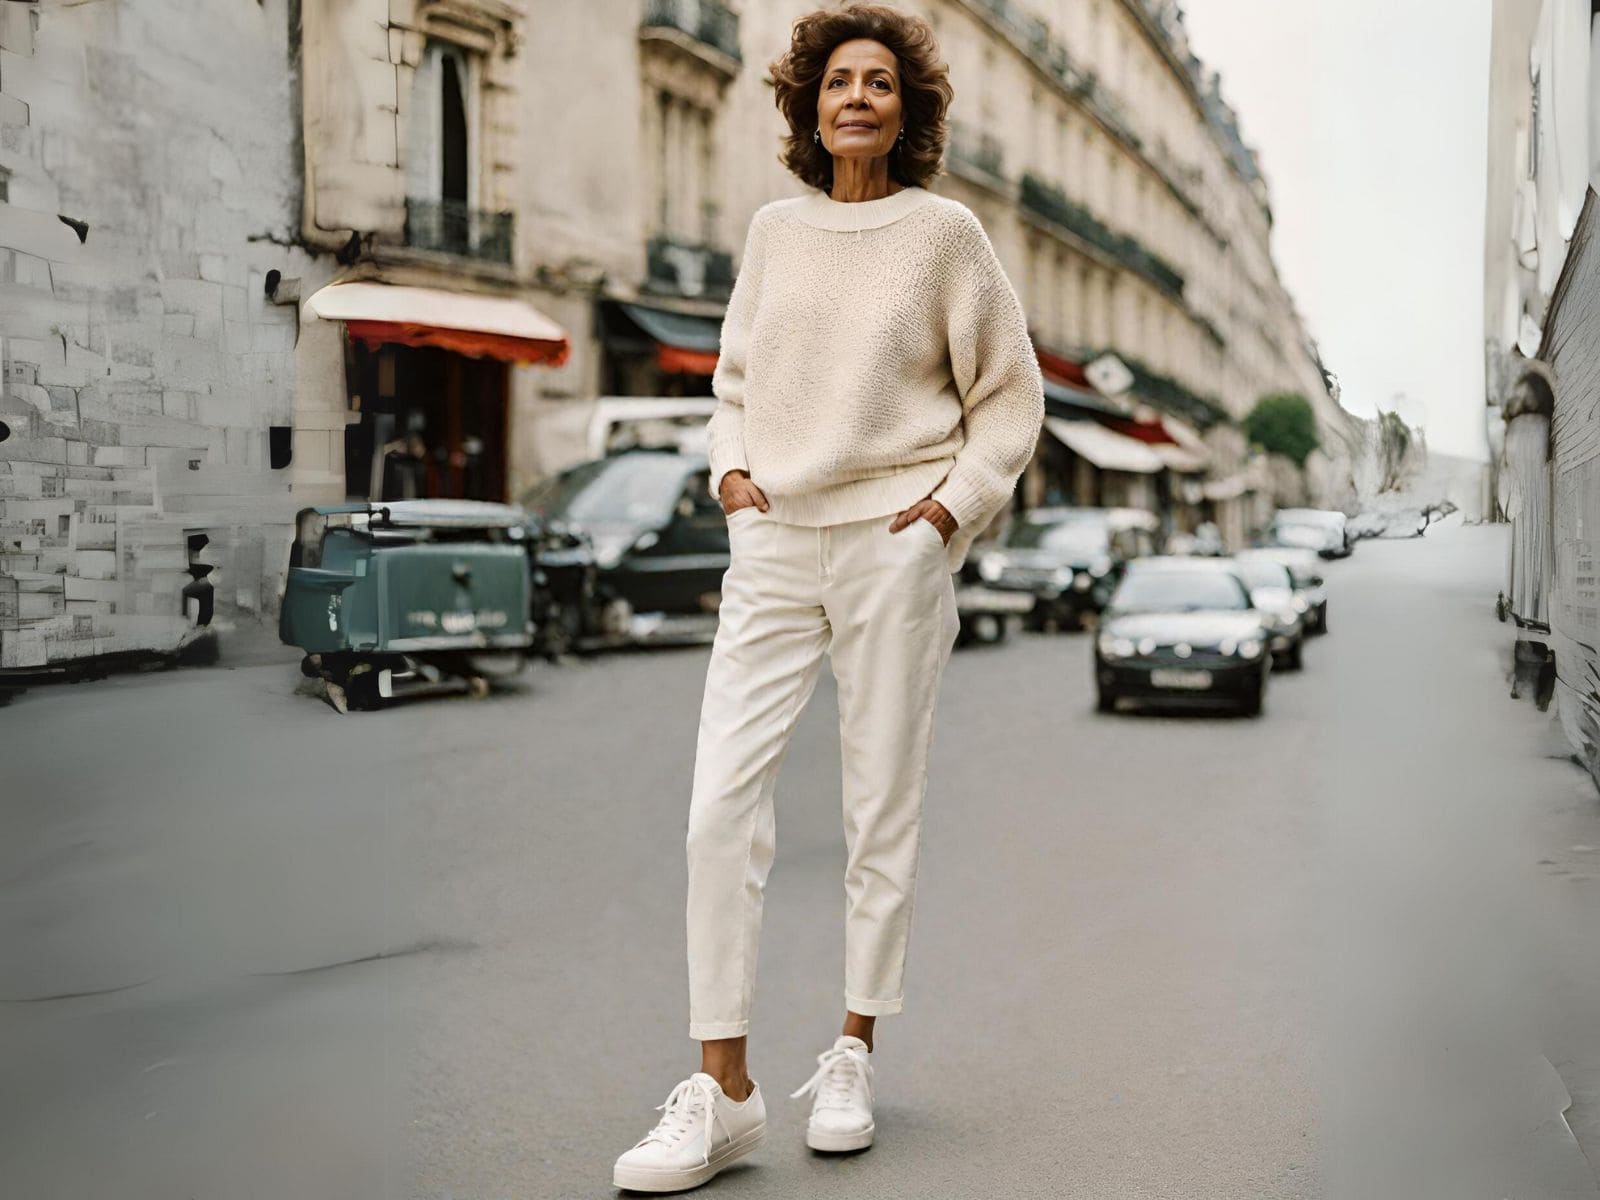 <p>Traveling is such an enjoyable experience for many but we have to admit that it can also be very exhausting, especially as we age. This is why comfort is very important when putting together outfits for traveling and here are 25 ways to do it in style once you’re over 60.</p>